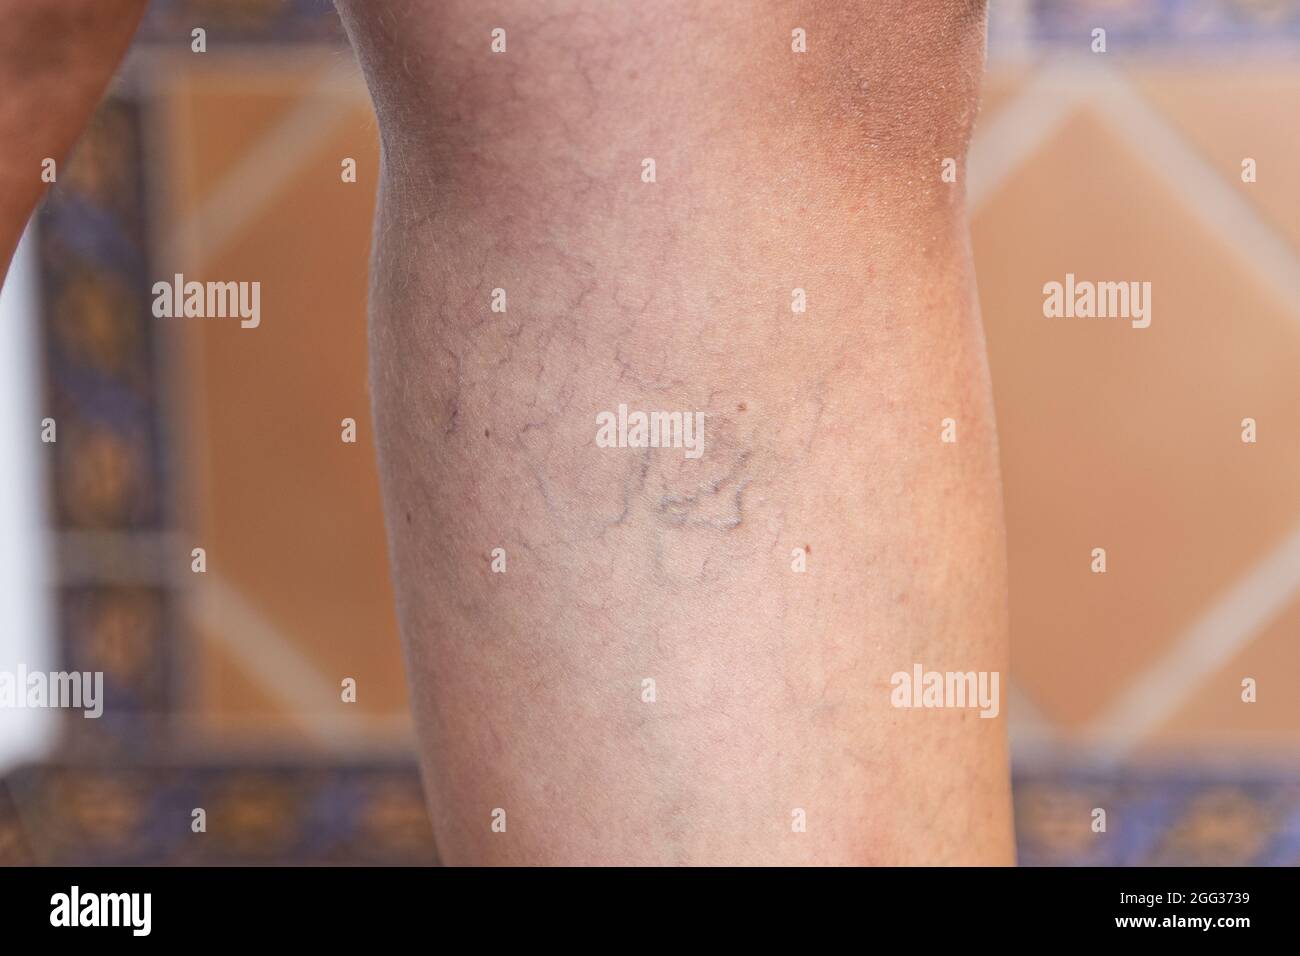 Adult woman's leg with varicose veins Stock Photo